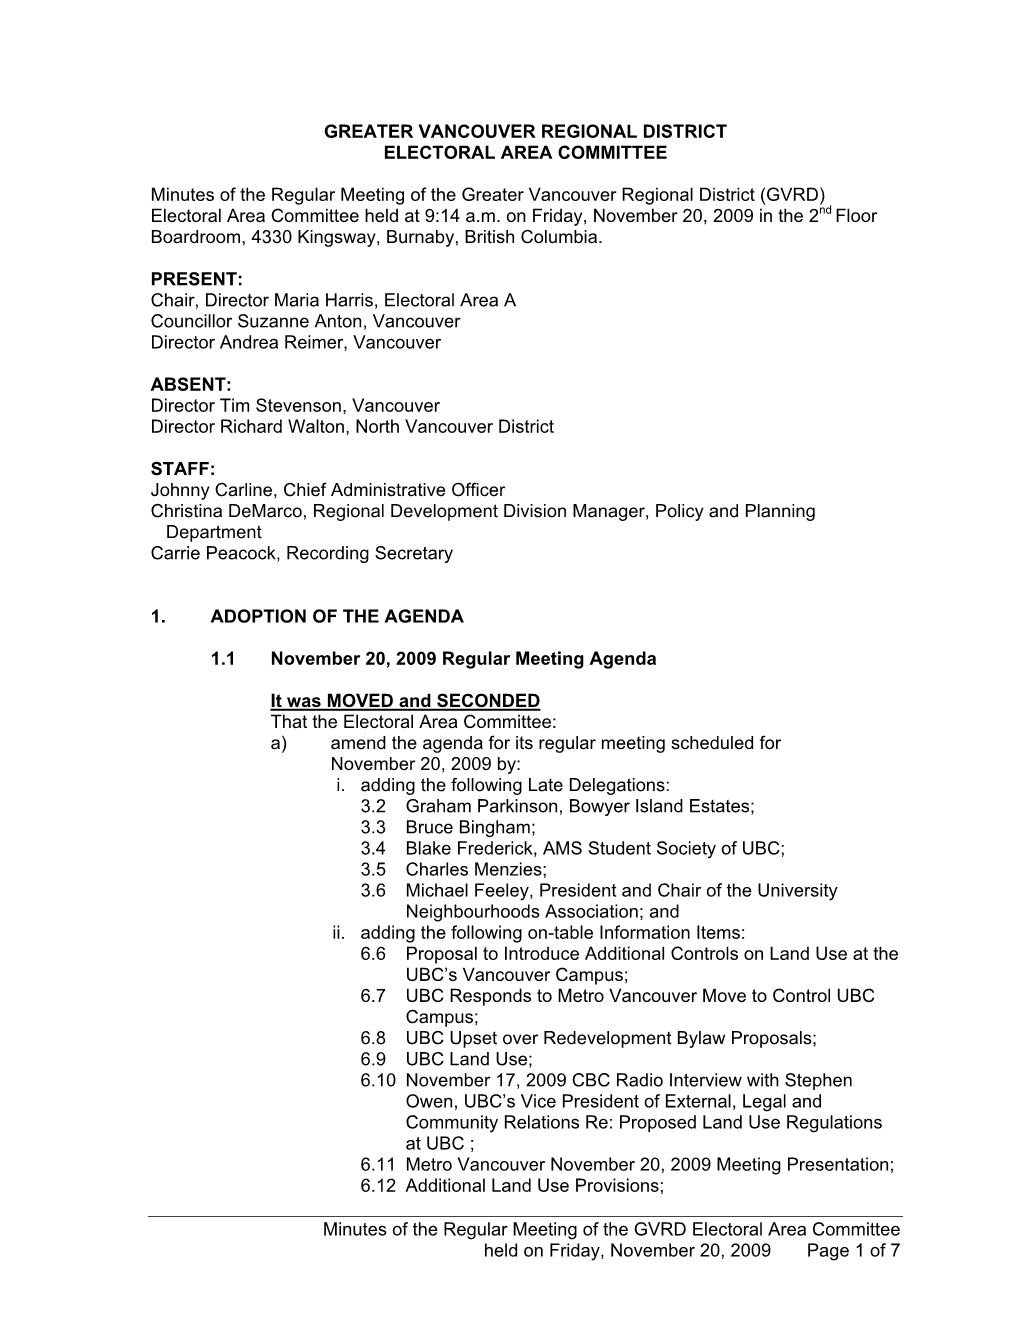 Minutes of the Regular Meeting of the GVRD Electoral Area Committee Held on Friday, November 20, 2009 Page 1 of 7